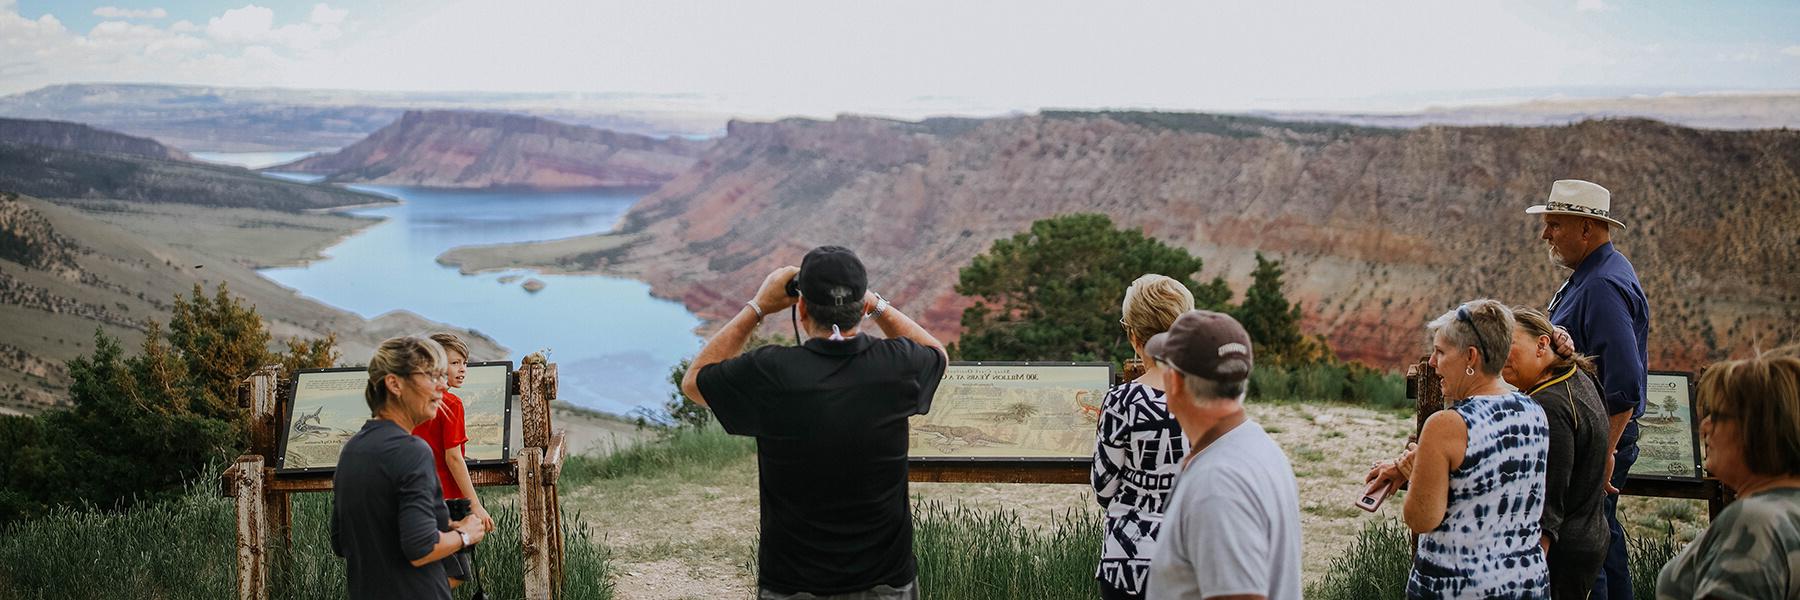 Visitors enjoying the scenic overlooks in Flaming Gorge National Recreation Area